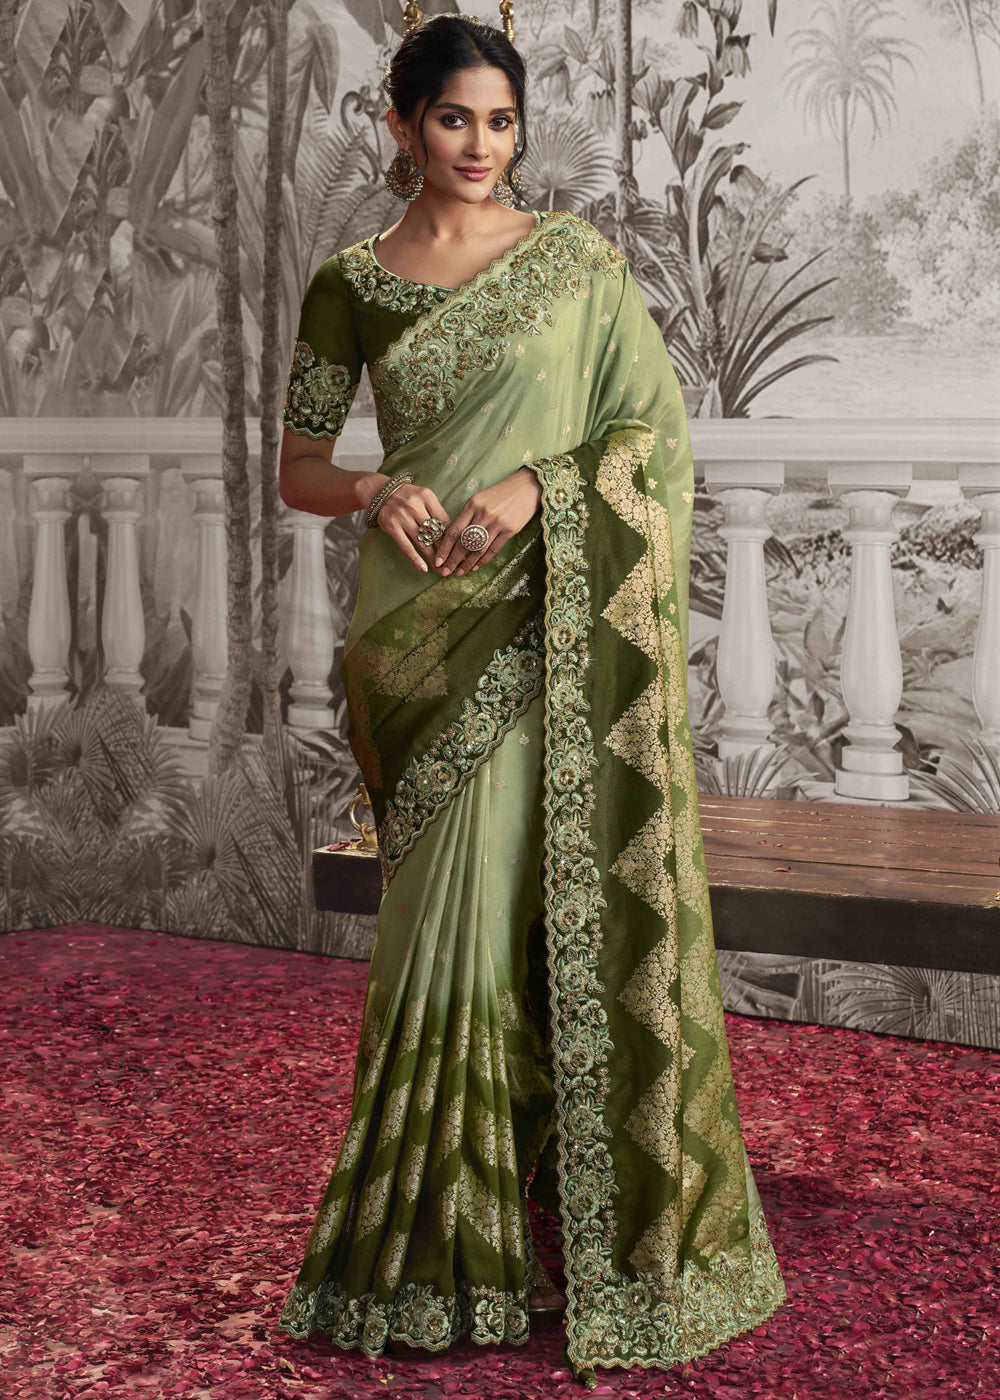 Best embroidered green color wedding saree with a contrast blouse.